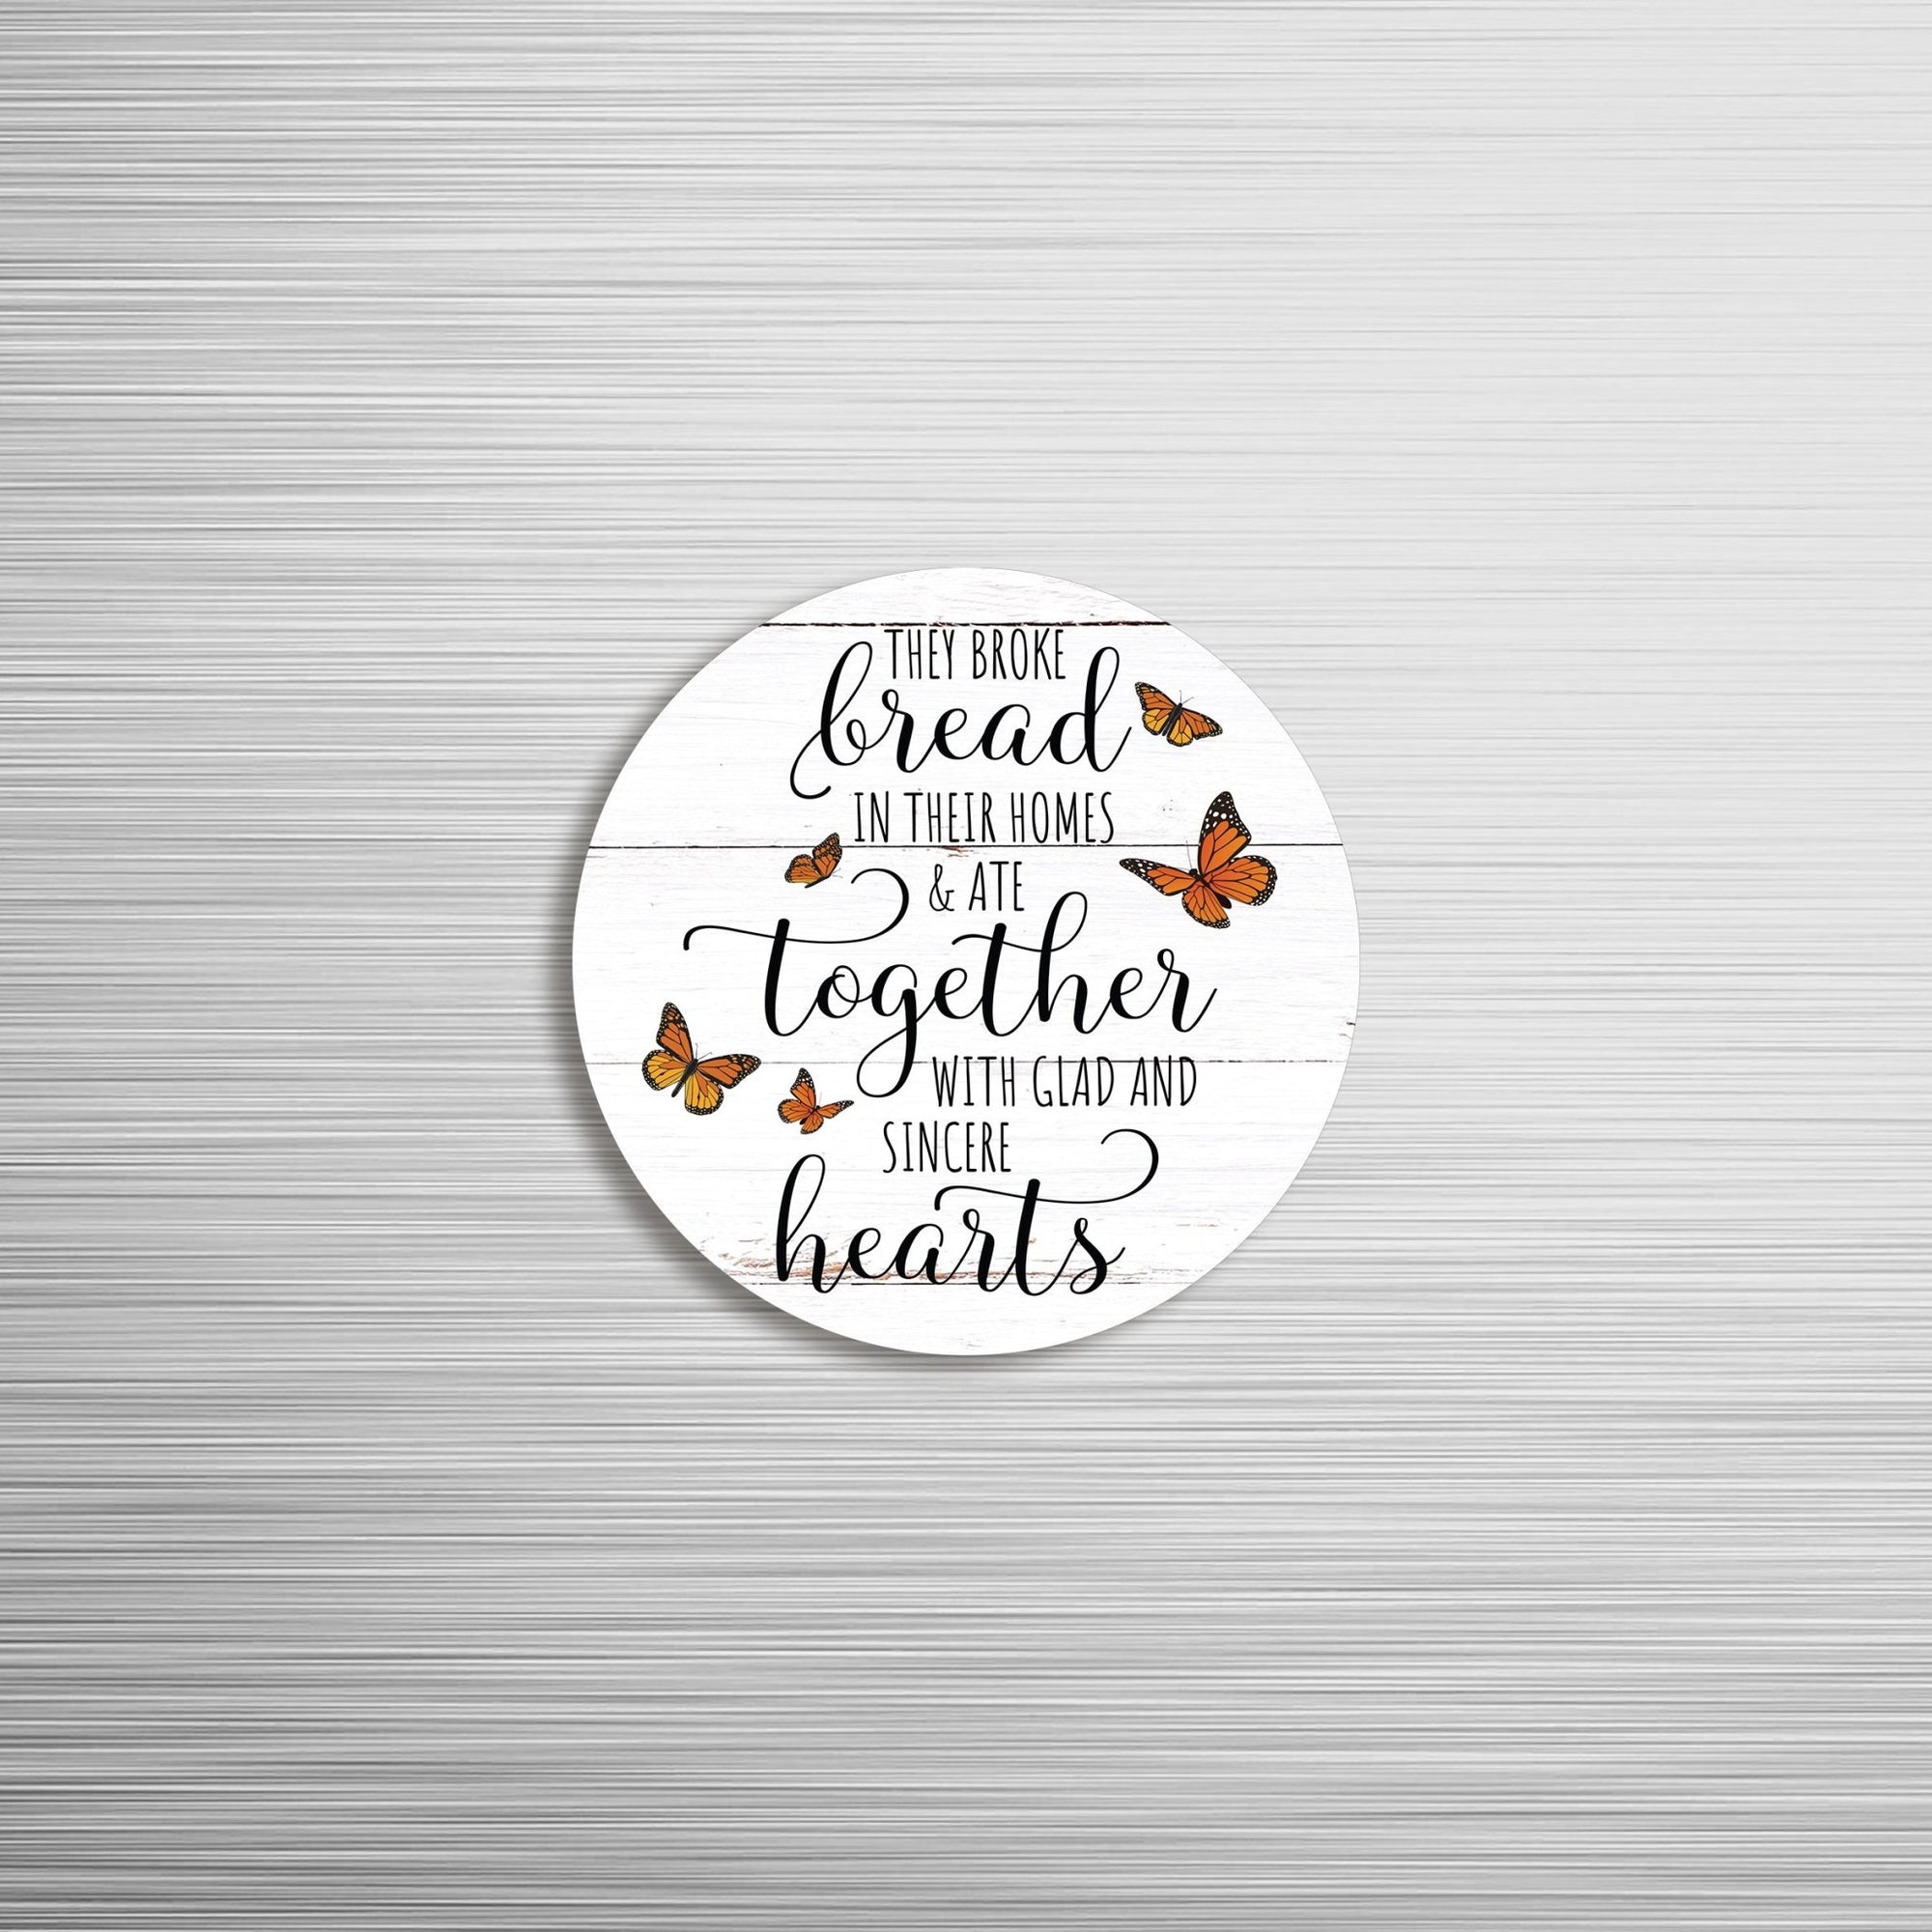 Family & Home Round Refrigerator Magnet Perfect Gift Idea For Home Décor - They Broke Bread - LifeSong Milestones